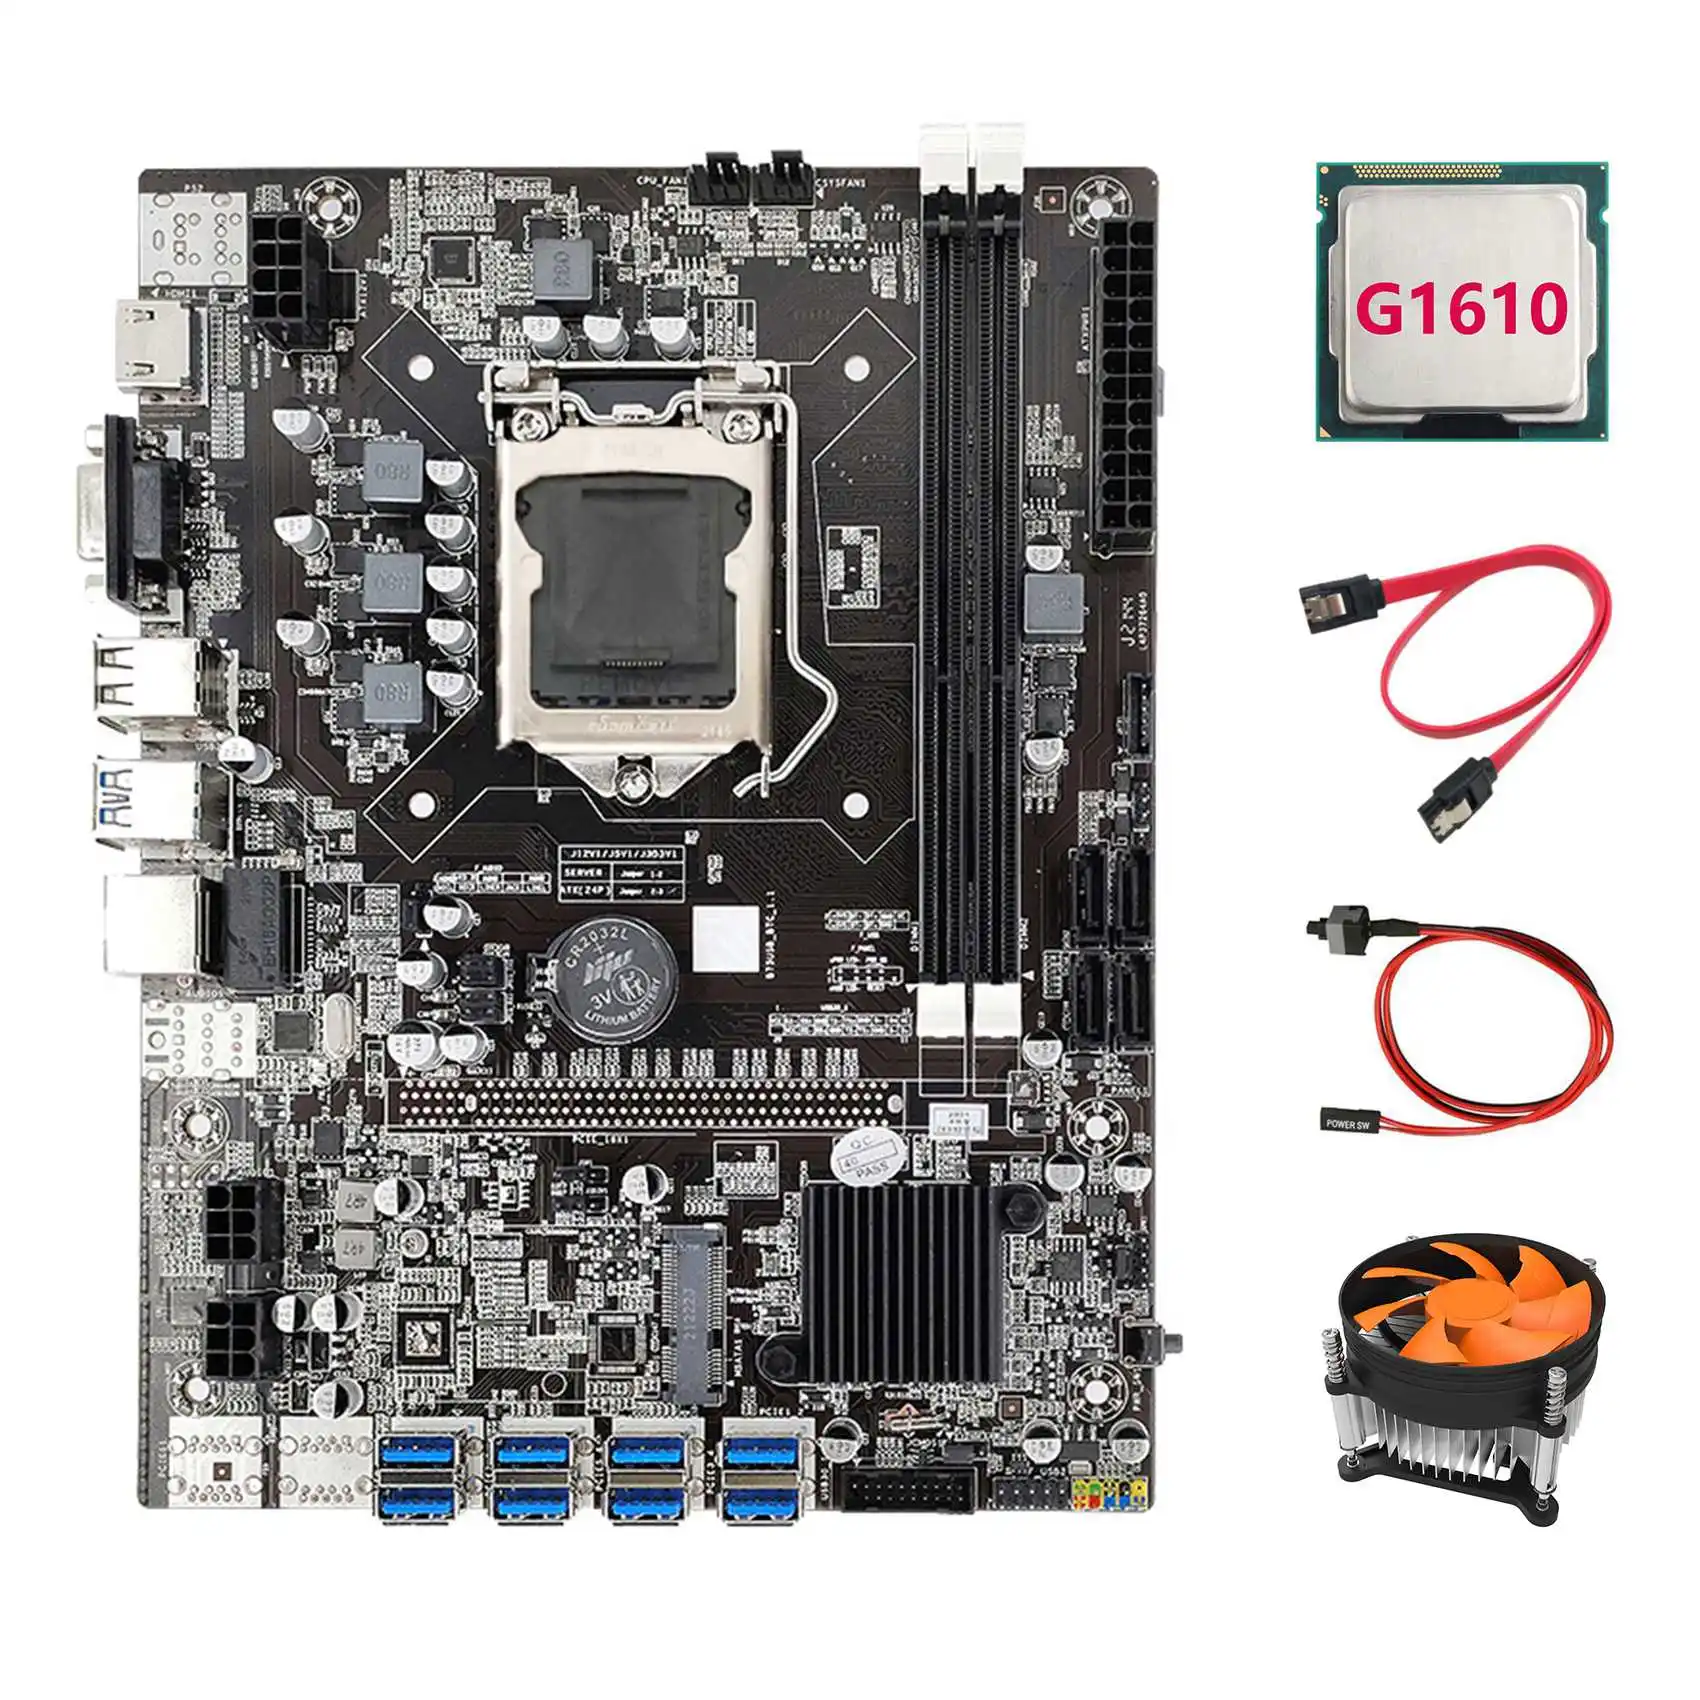 B75 ETH Mining Motherboard+G1610 CPU+Fan+SATA Cable+Switch Cable LGA1155 8XPCIE USB Adapter MSATA DDR3 B75 Motherboard